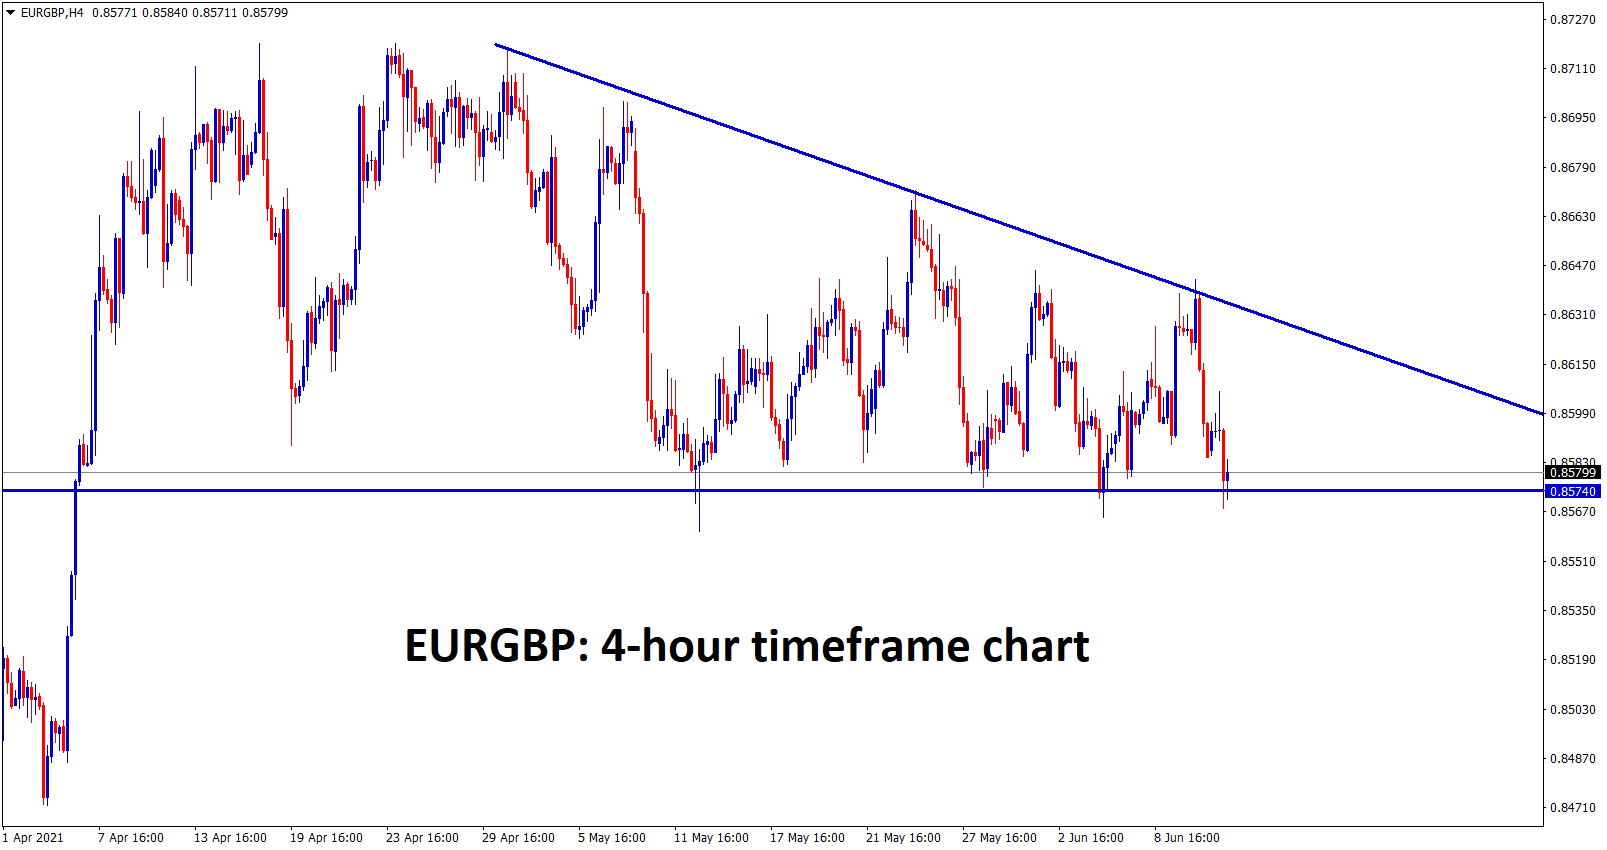 EURGBP is still moving between these descending Triangle pattern wait for the breakout from this pattern to catch the big move on EURGBP